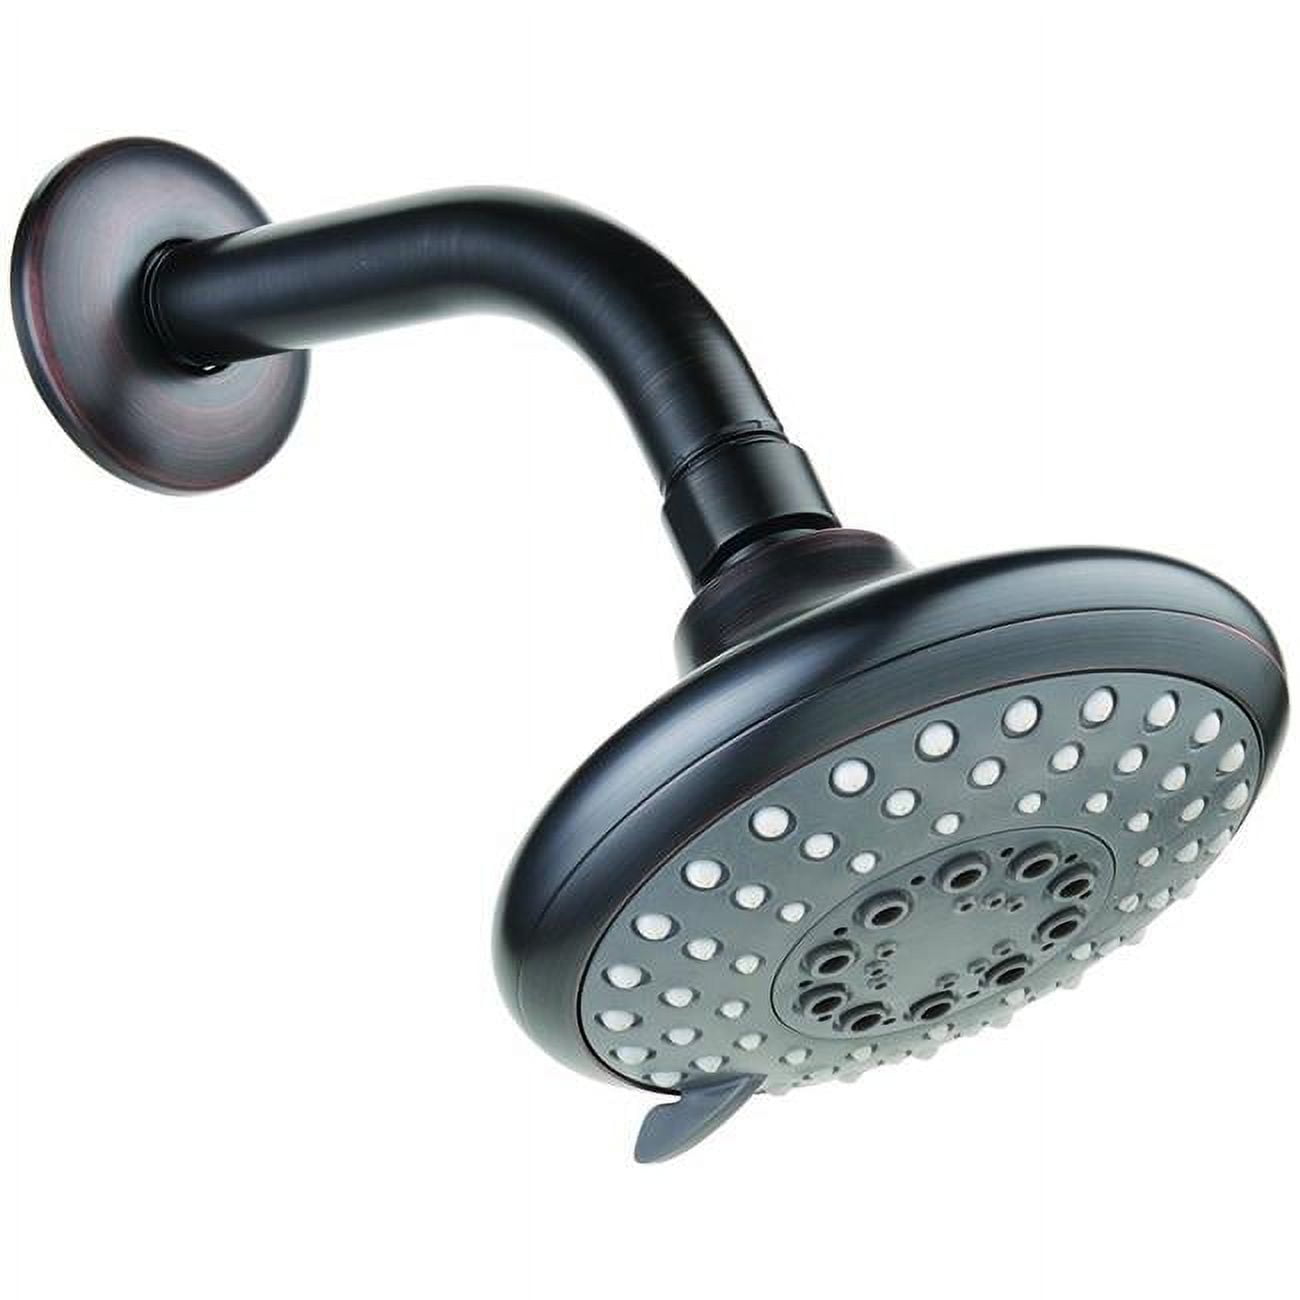 Sh2770500dbr 5-jet Showerhead With Arm And Flange